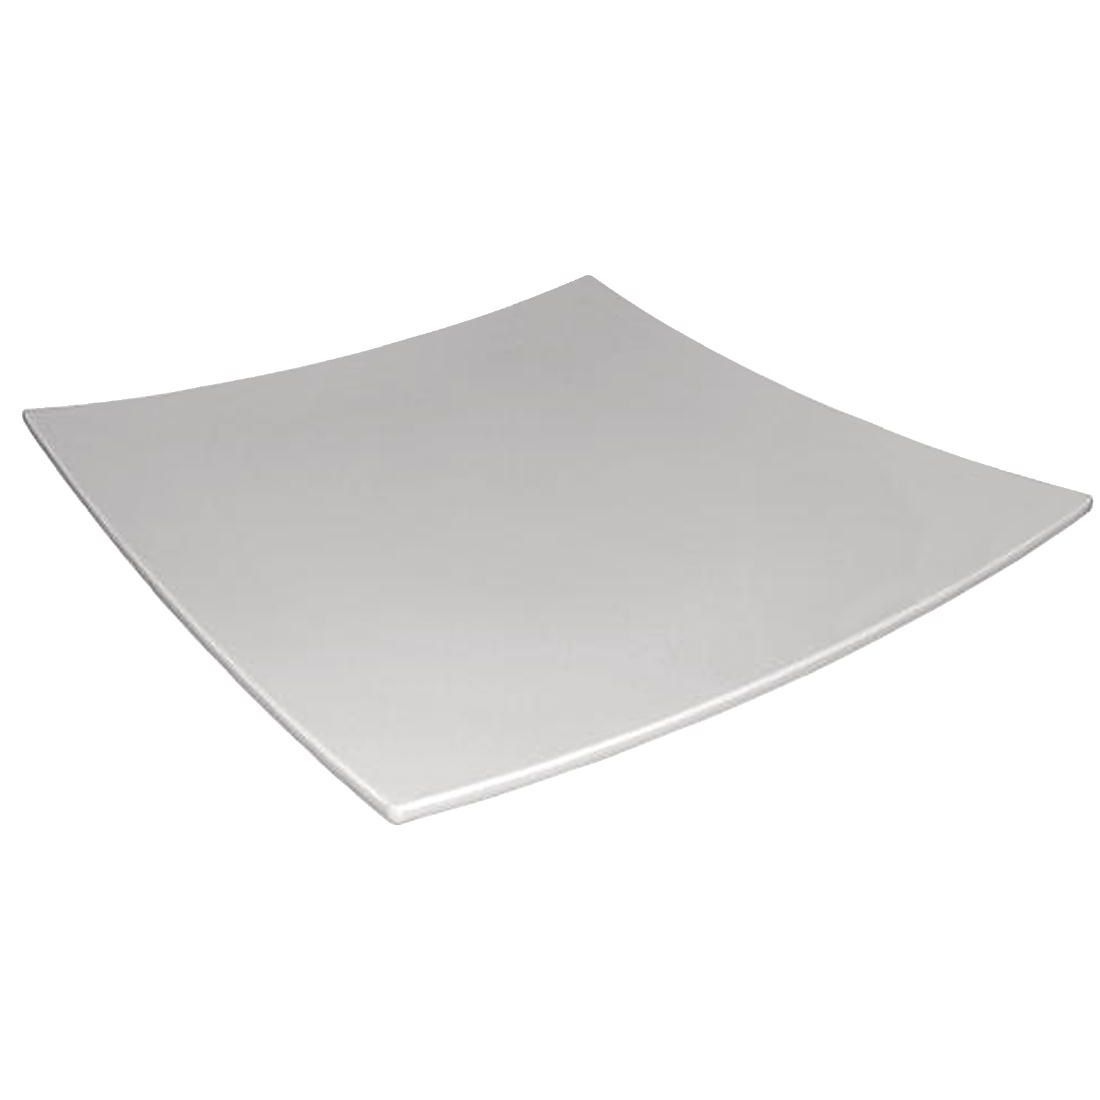 Curved Square Melamine Plate White 400mm